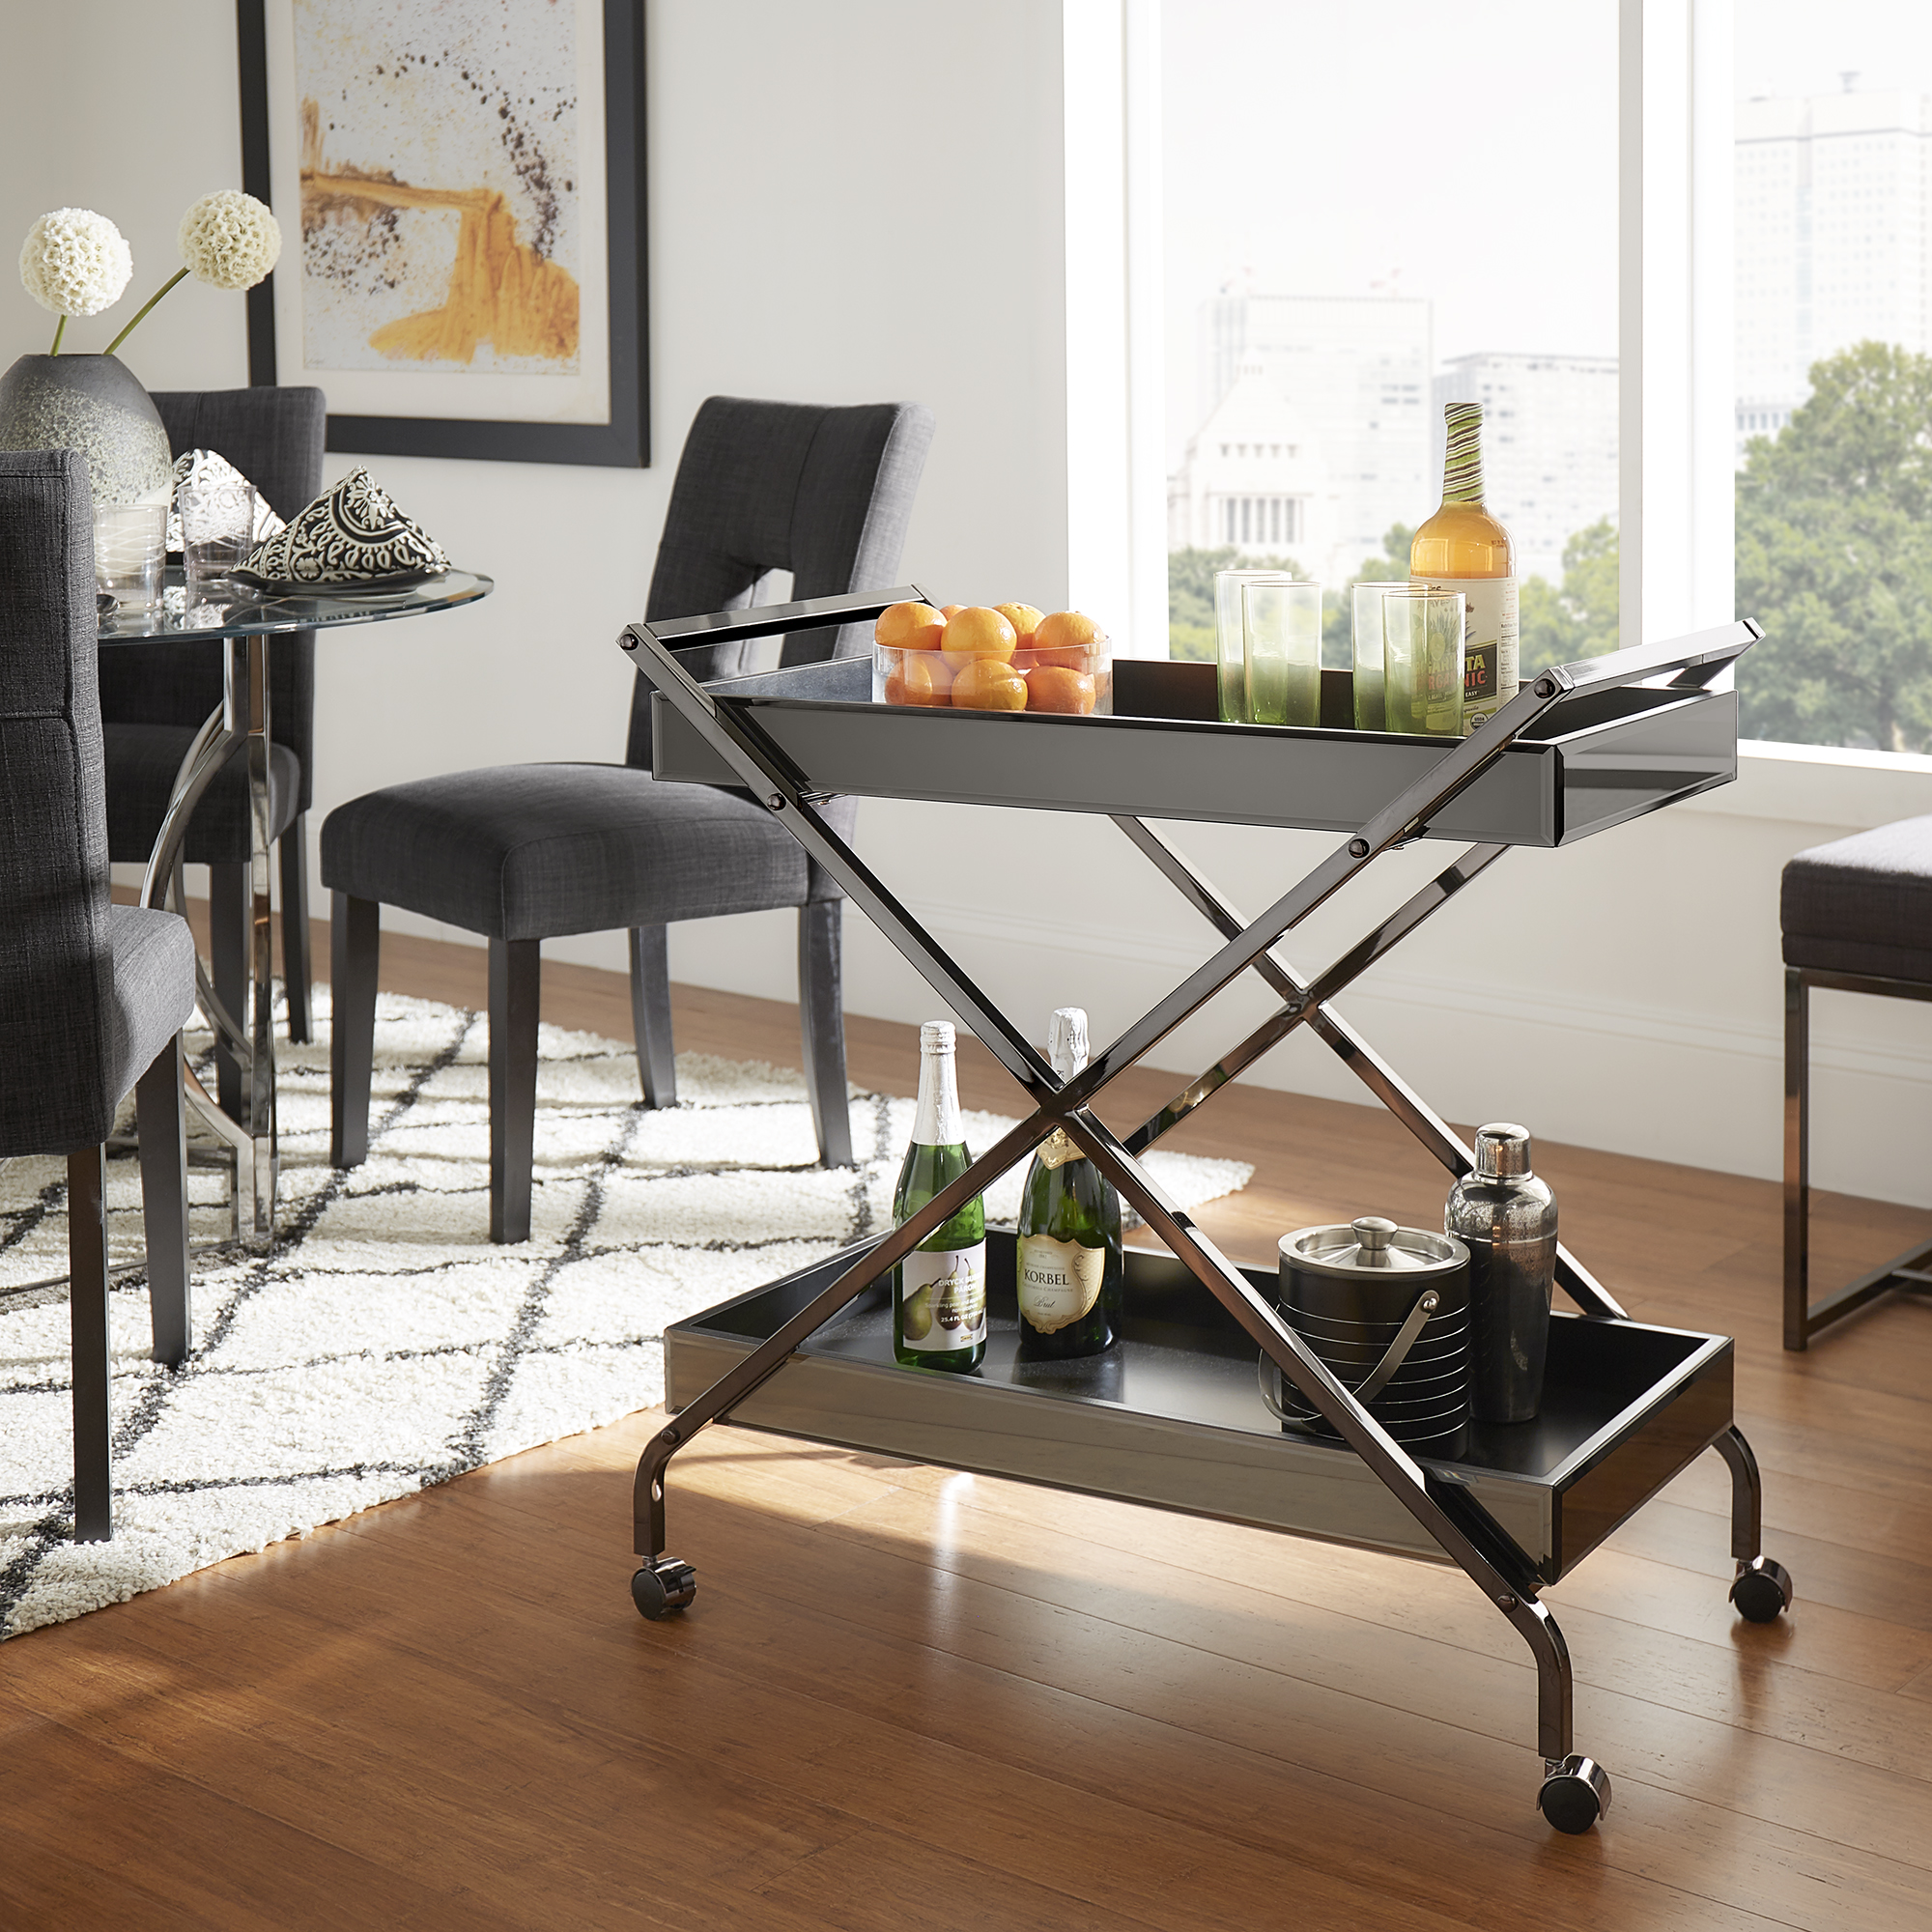 In this image, we use the same bar cart to display a different way as to how to style a bar cart. This bar cart still has the mirror sides and chrome frame. The décor has a lot more color, as the top shelf has a bowl of oranges, green glasses, and an orange bottle. The bottle shelf has green bottles and metal barware.